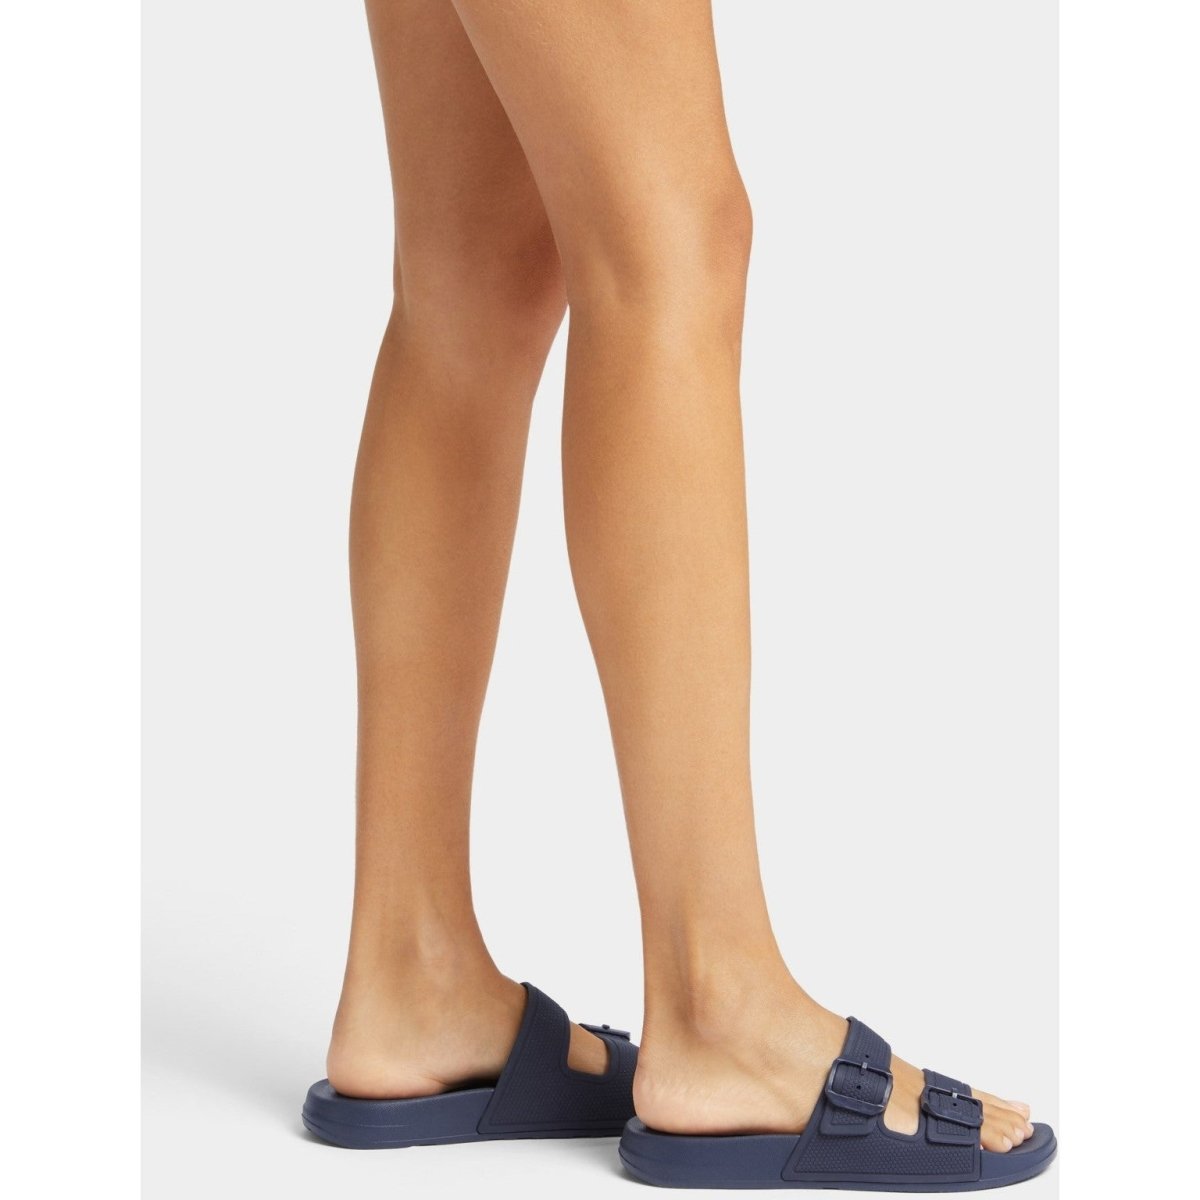 Fitflop iQUSHION Ladies Summer Beach Mule Sliders - Shoe Store Direct